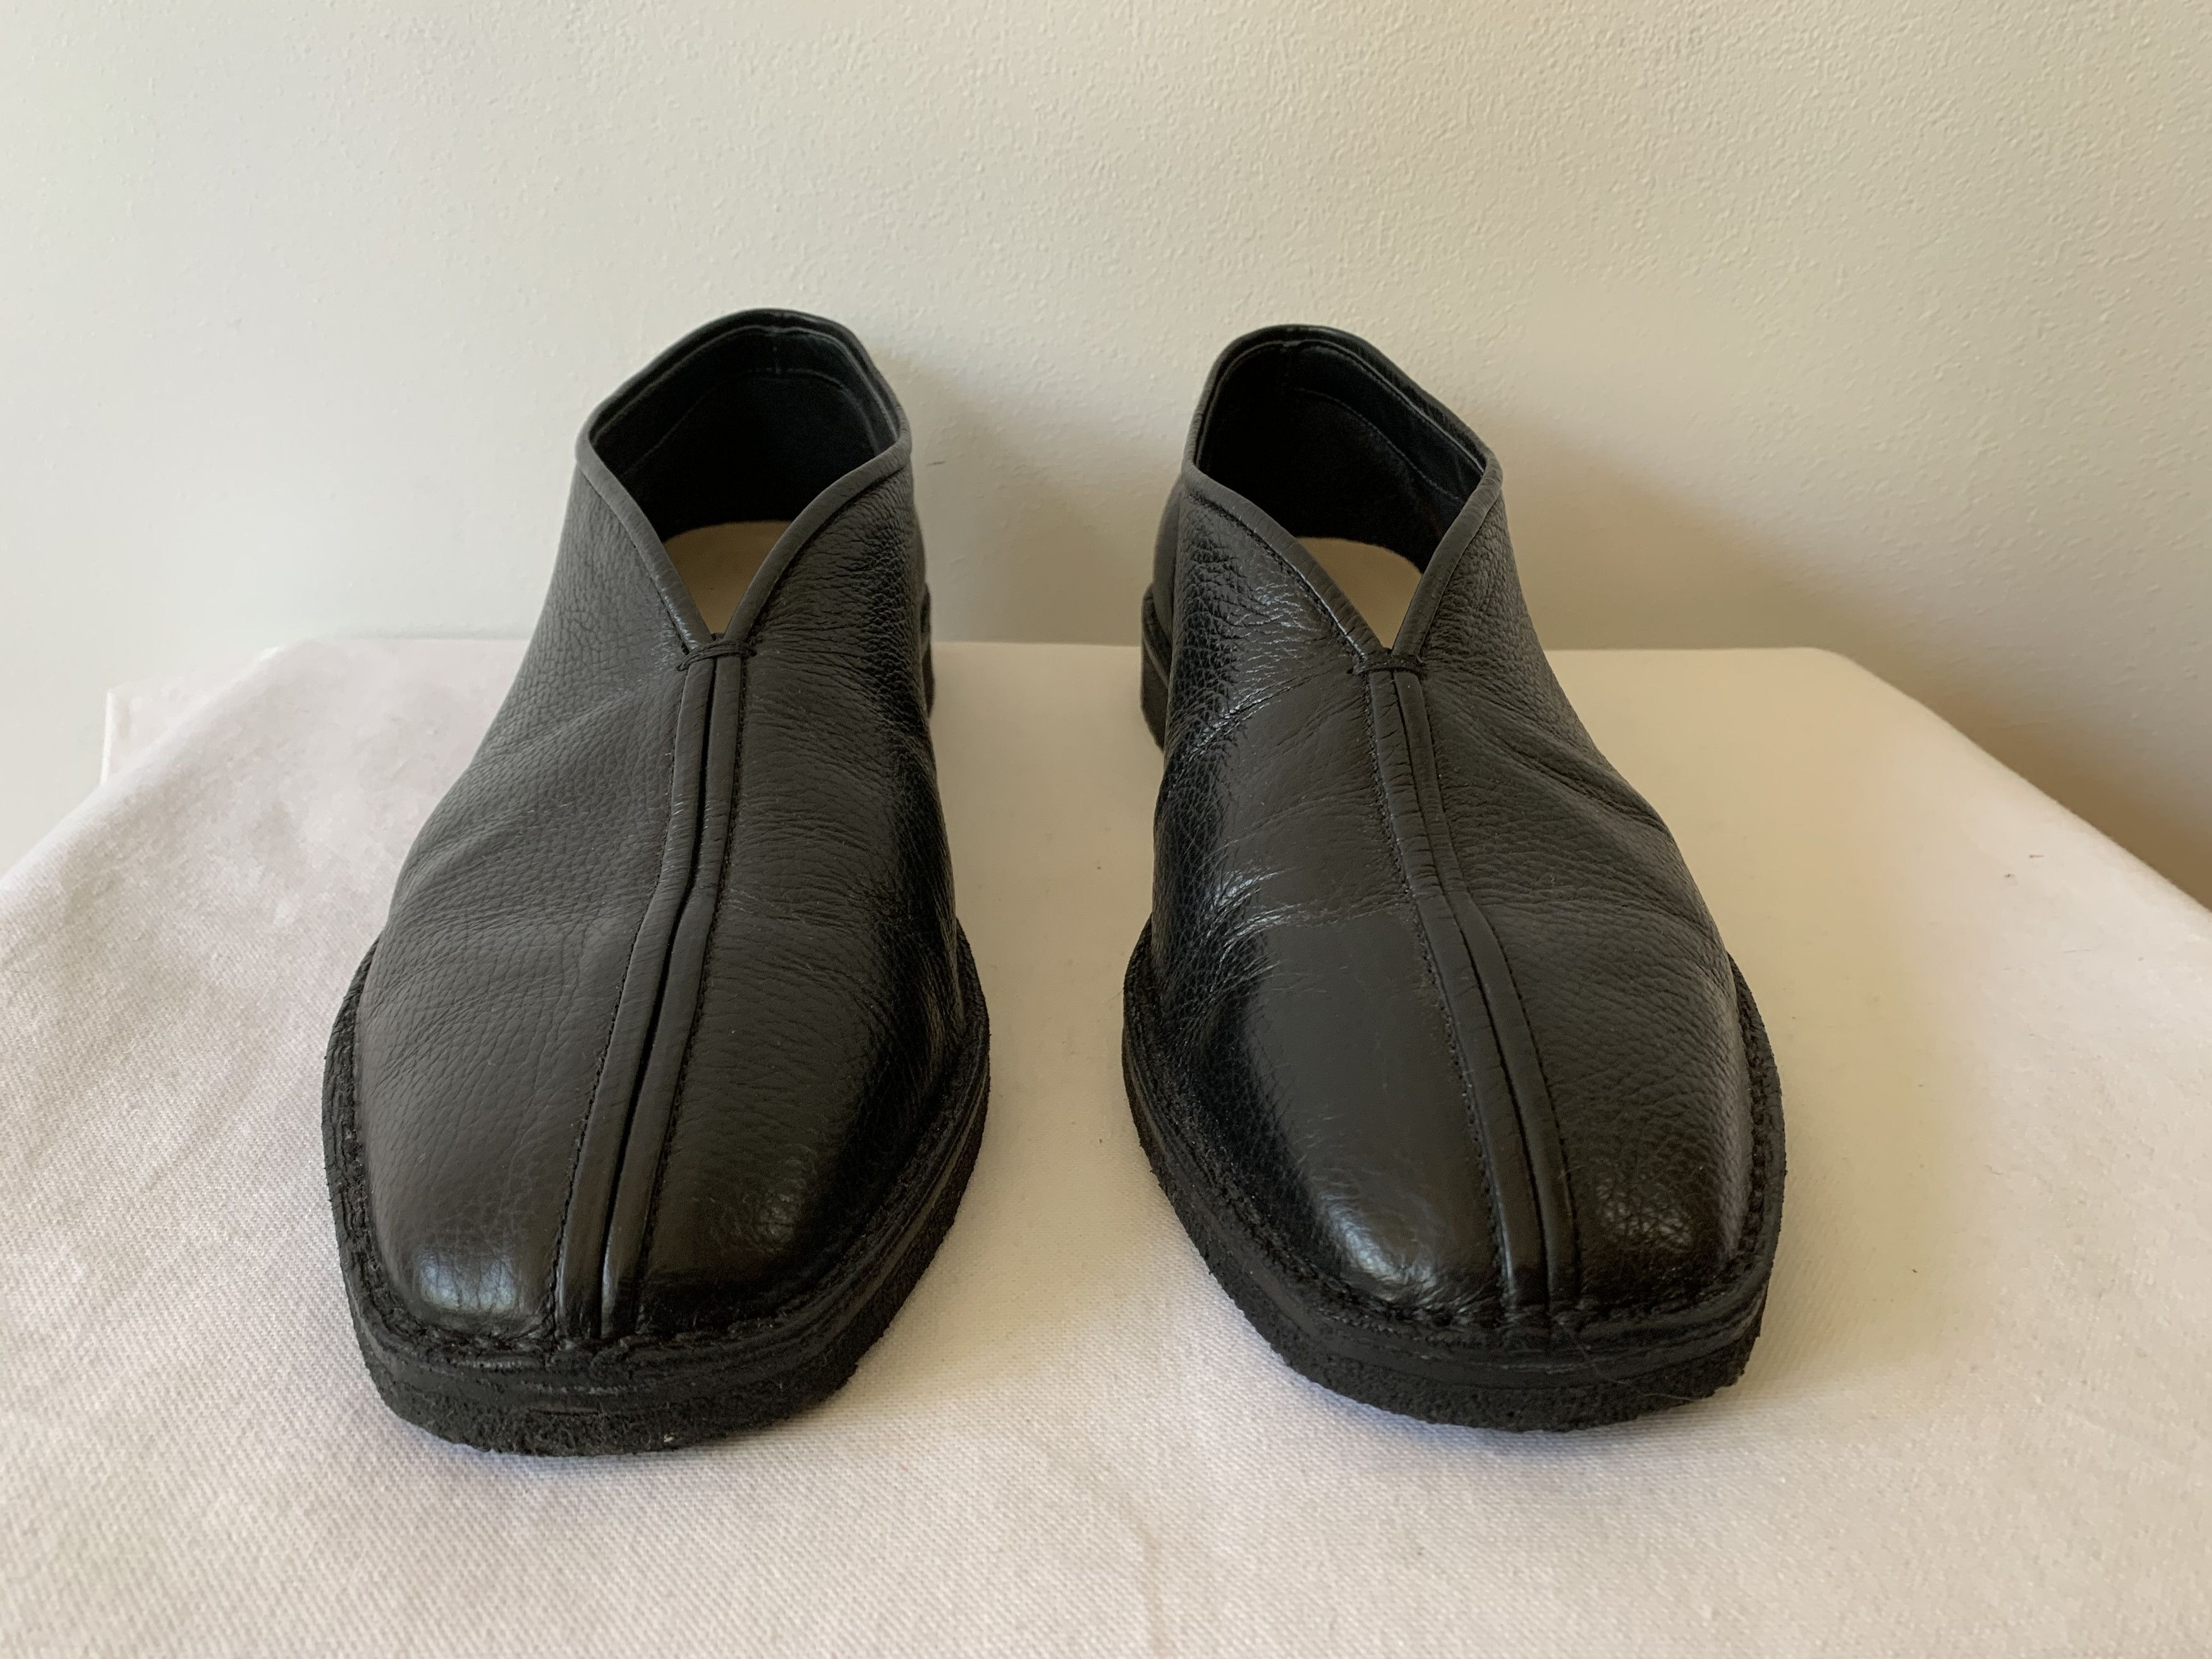 Lemaire Lemaire Chinese Slippers Black Leather Loafers Sz 45 Size US 12 / EU 45 - 2 Preview